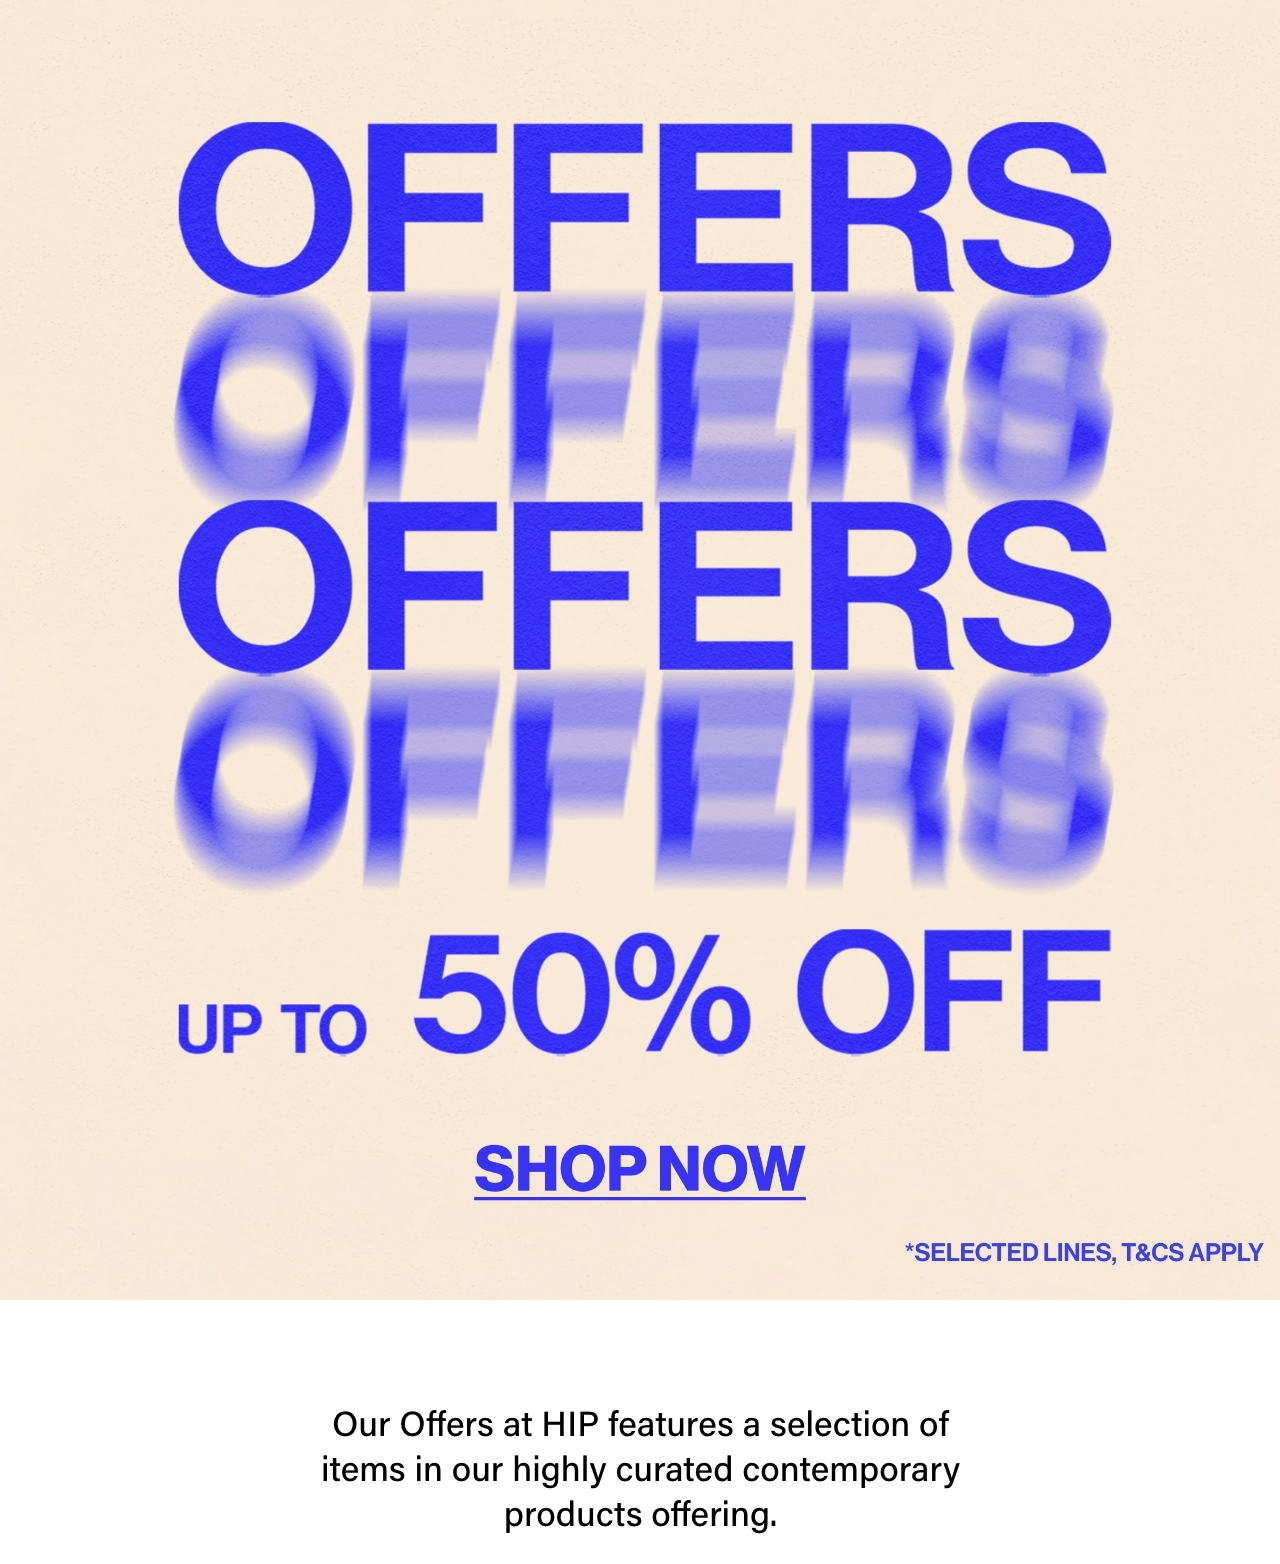 Offers - Up to 50% Off